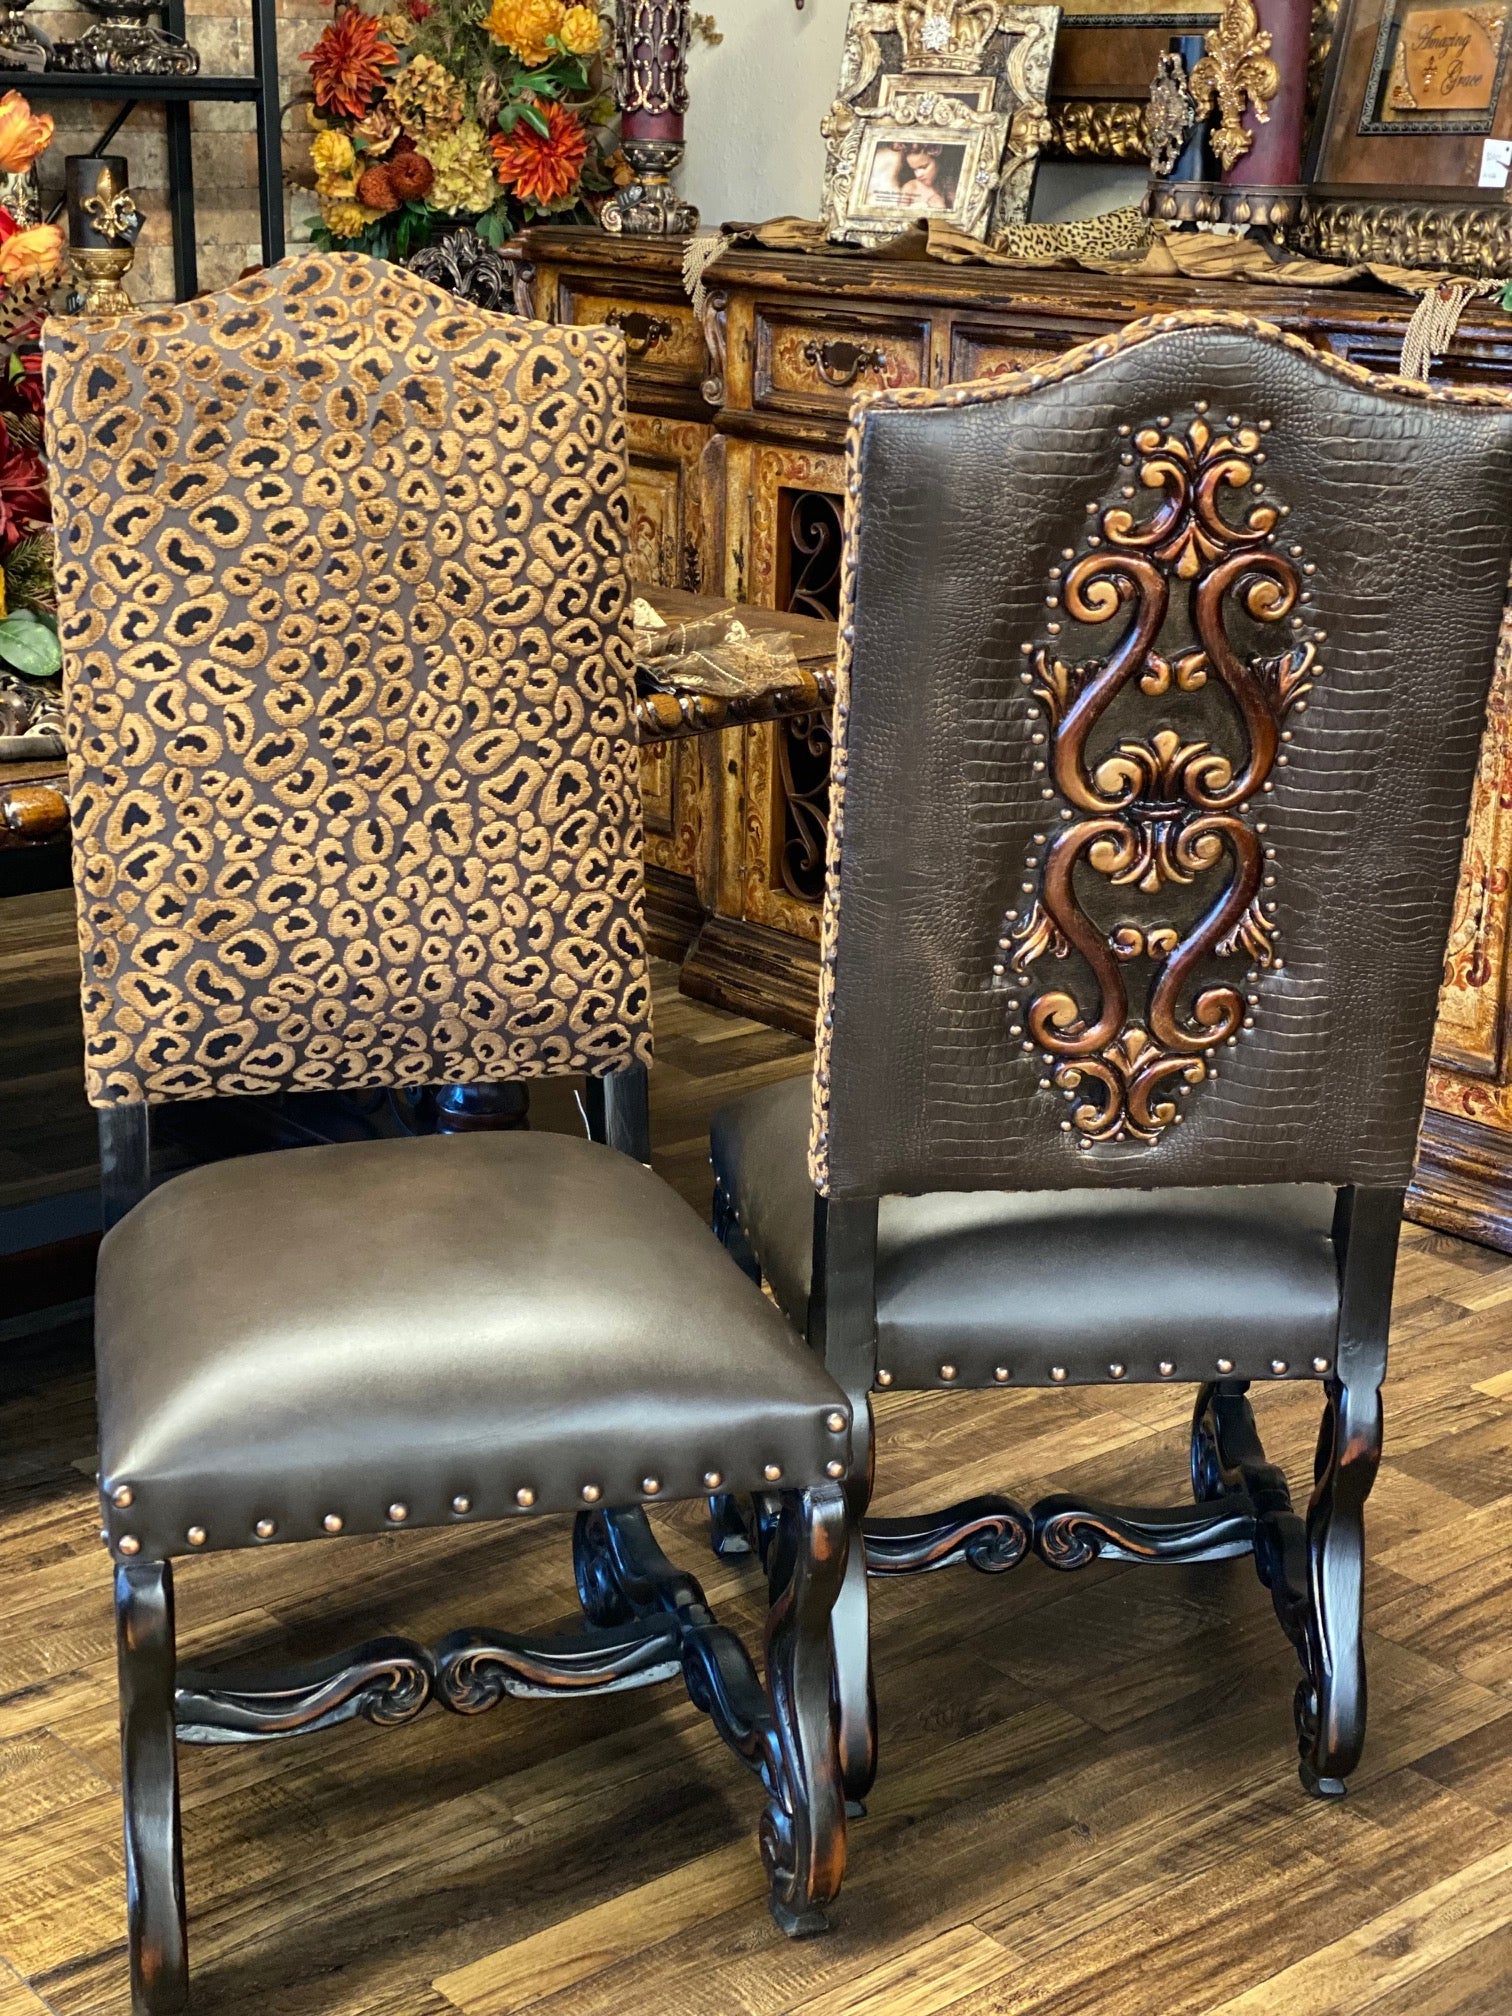 Old World Upholstered Dining Room Chairs Leopard Chenille Print with Carved Detailing on Back